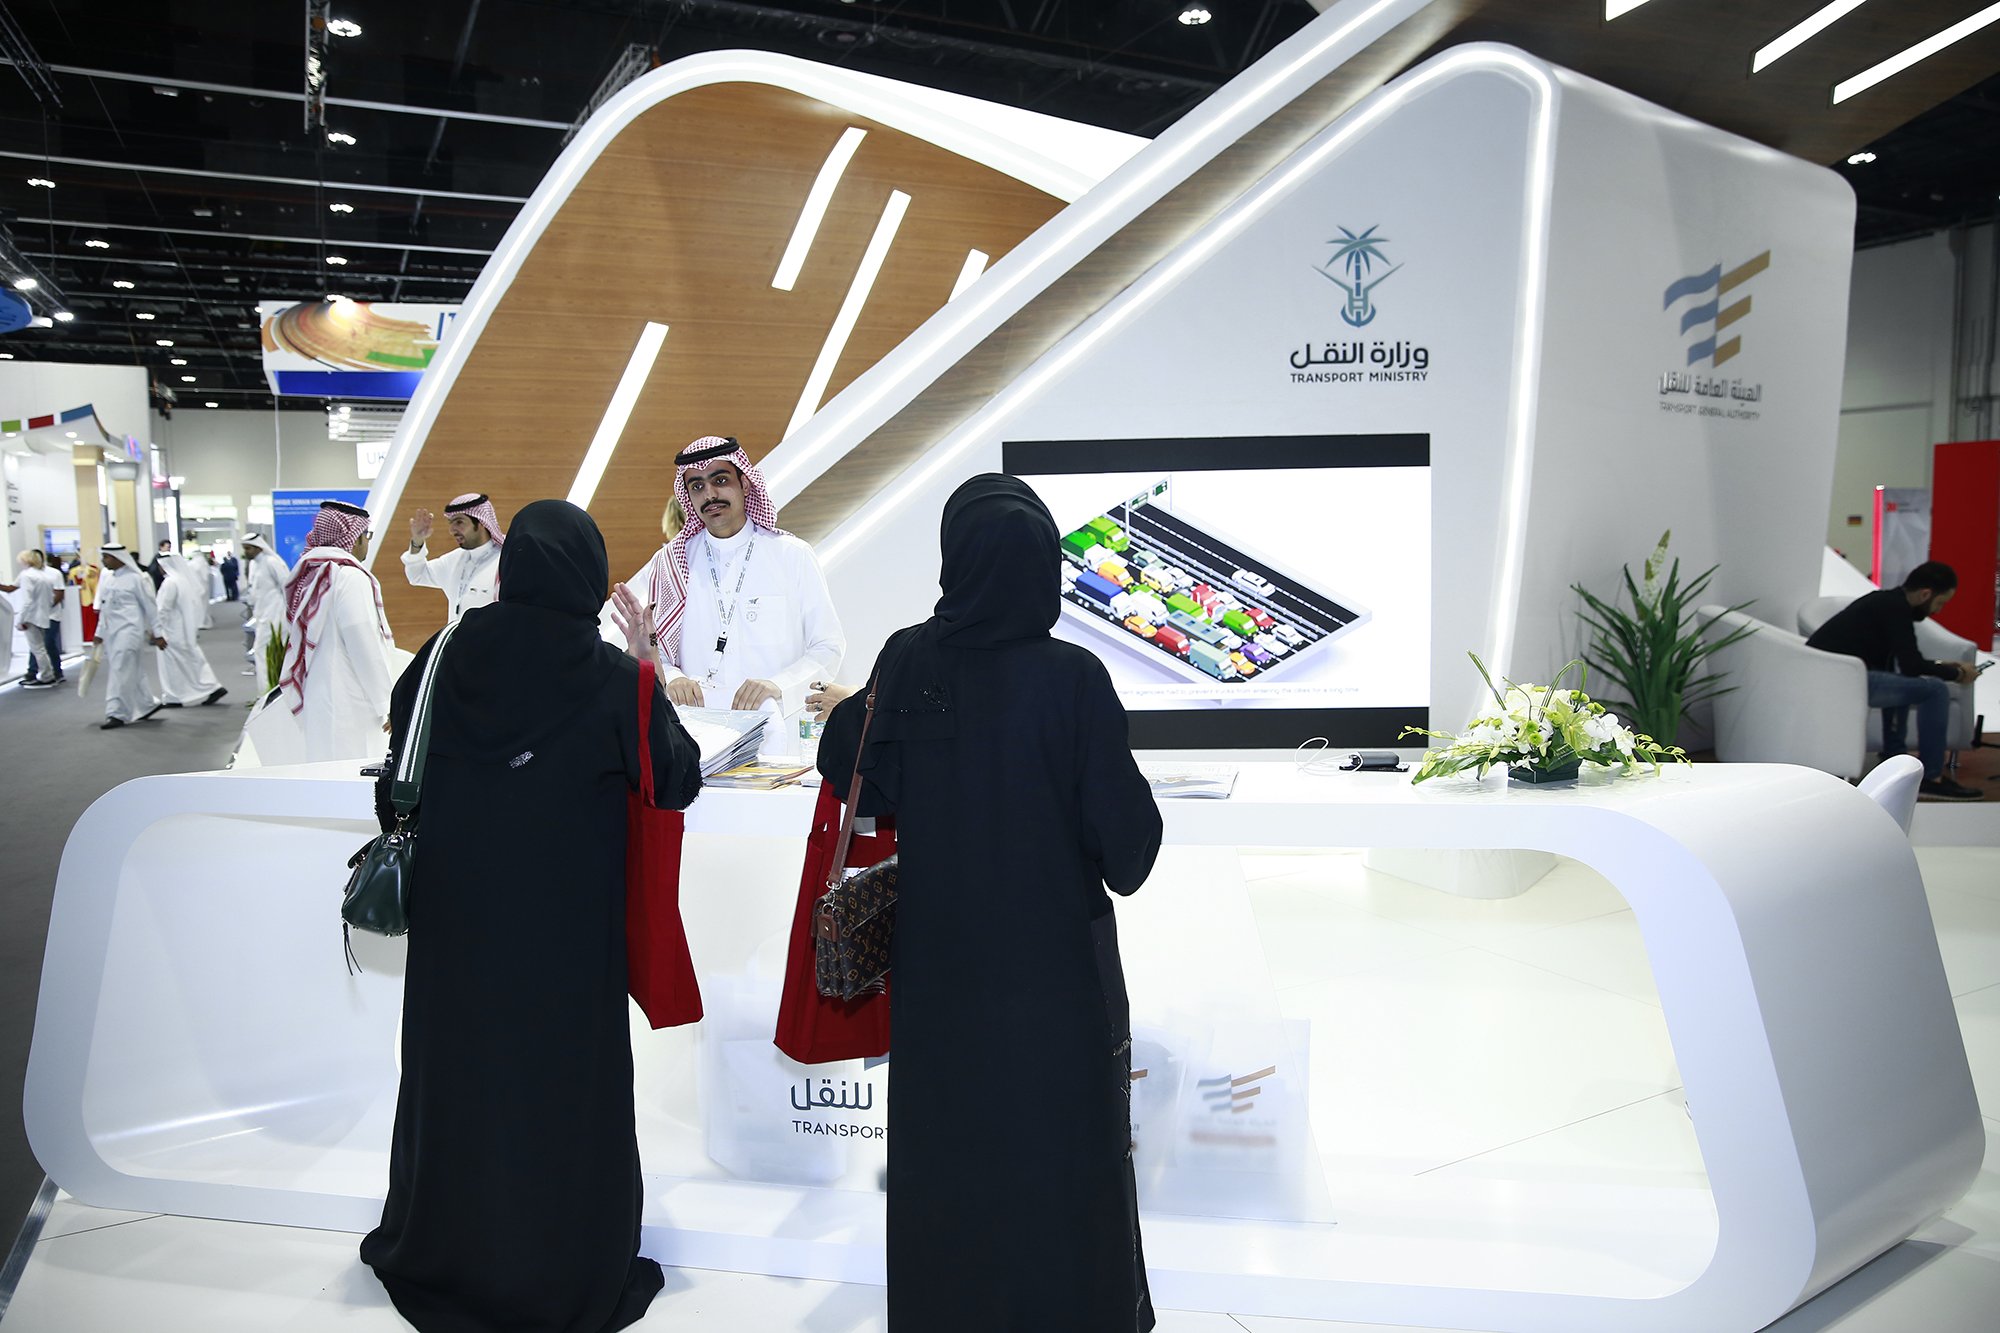 white glossy reception at the stand of the Ministry of Transport of Saudi Arabia